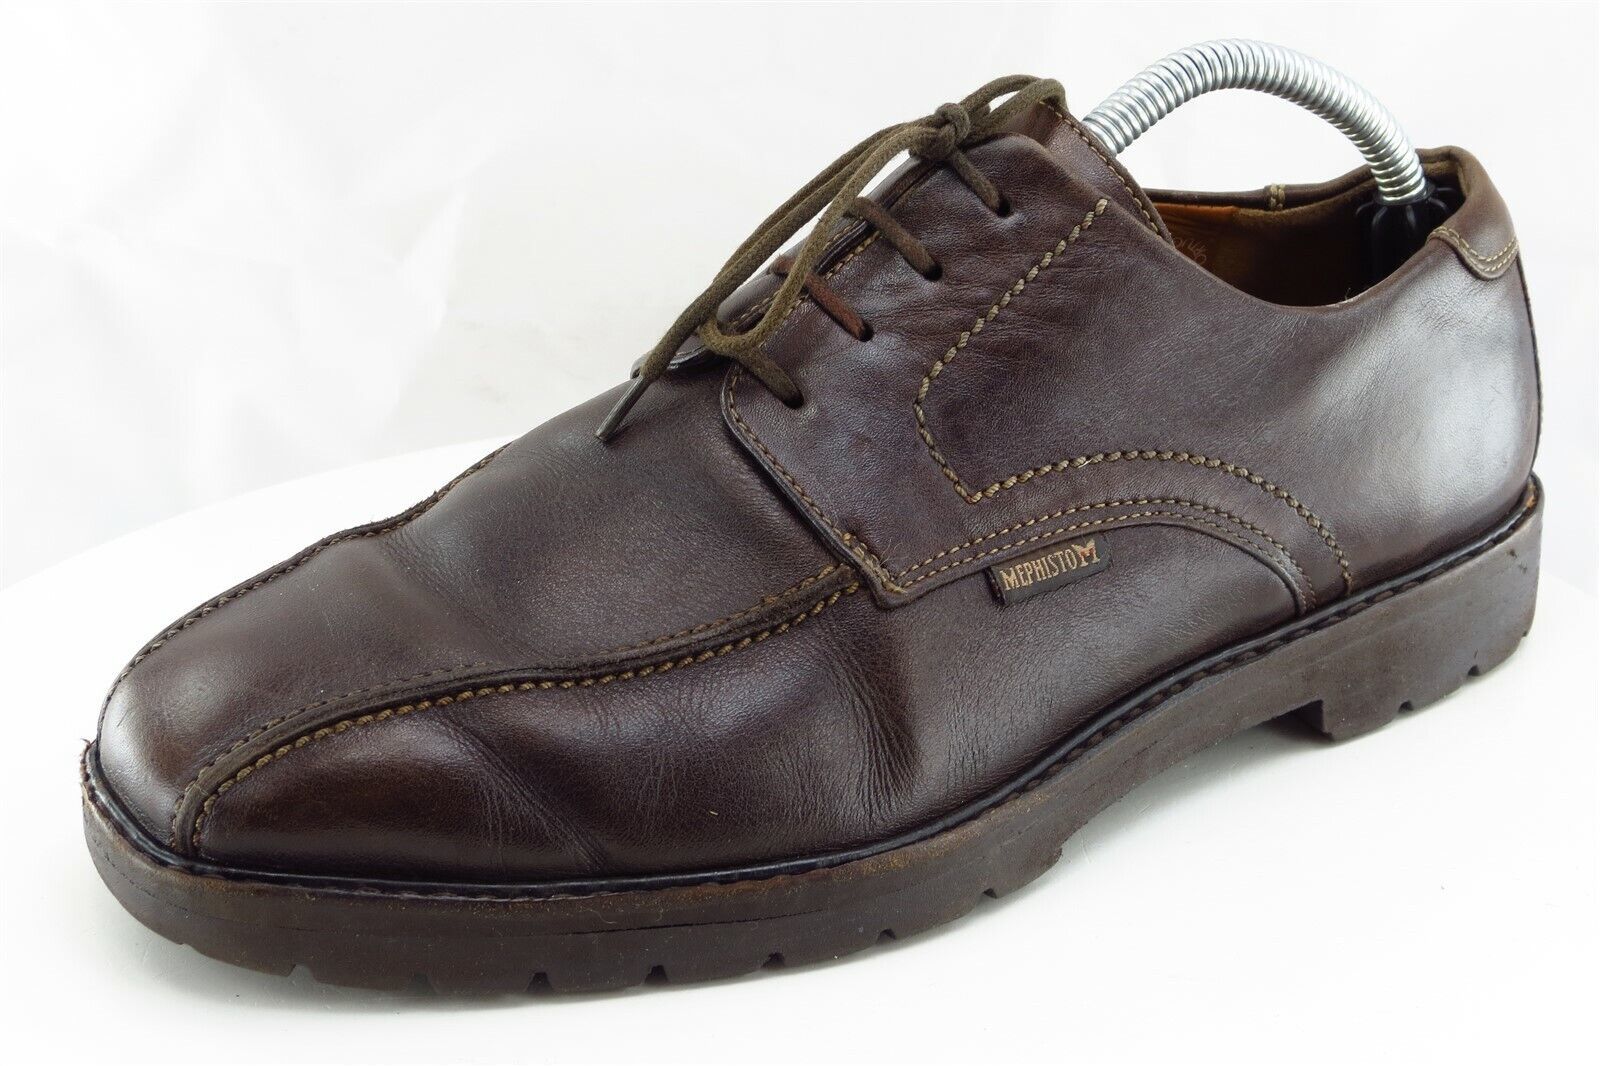 Primary image for Mephisto Goodyear Shoes Sz 8.5 M Brown Derby Oxfords Leather Men 720132231